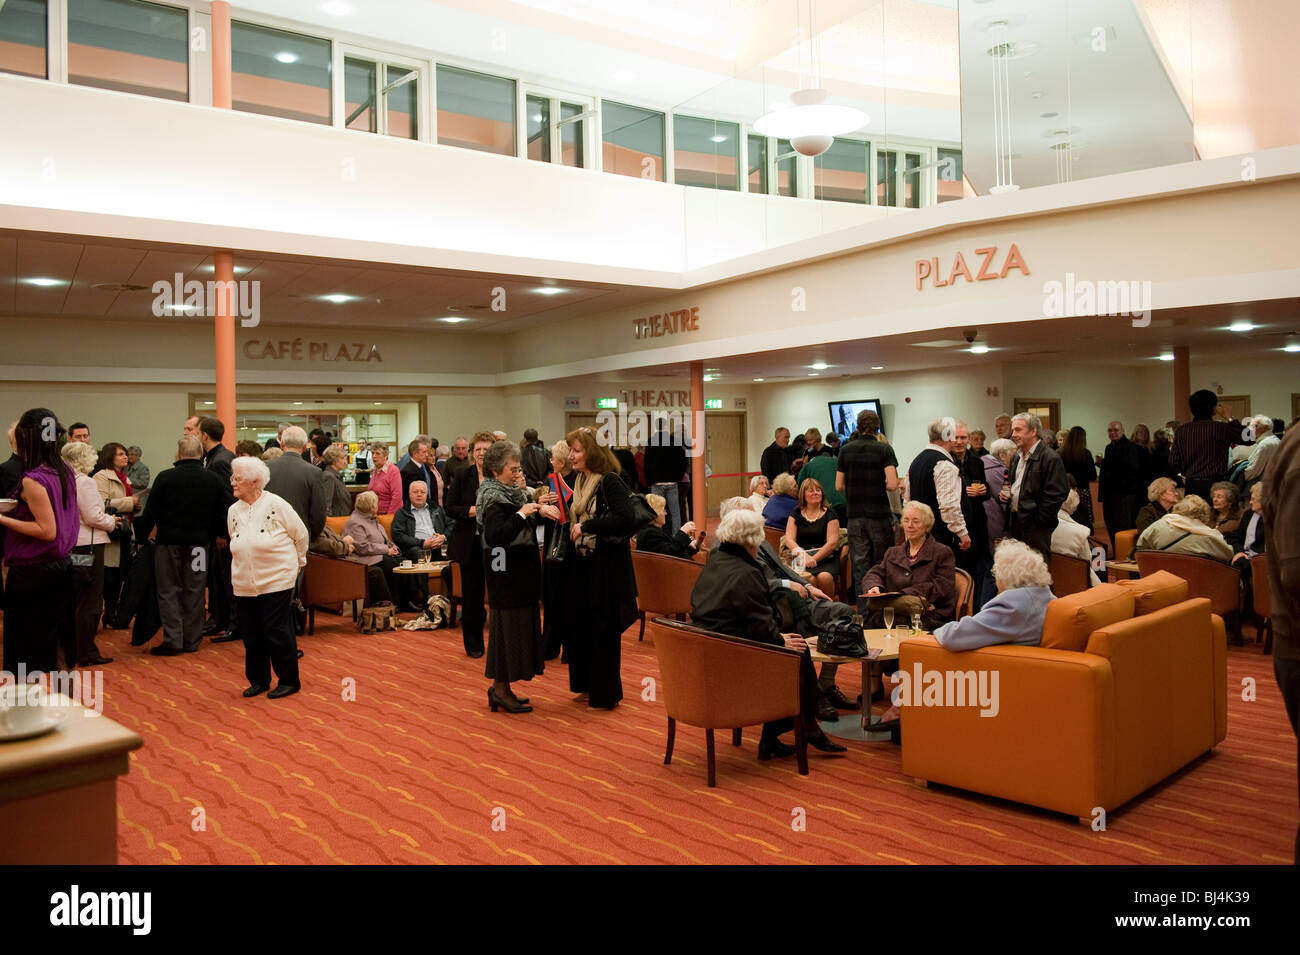 Floral Pavilion theatre foyer with crowds of patrons Stock Photo